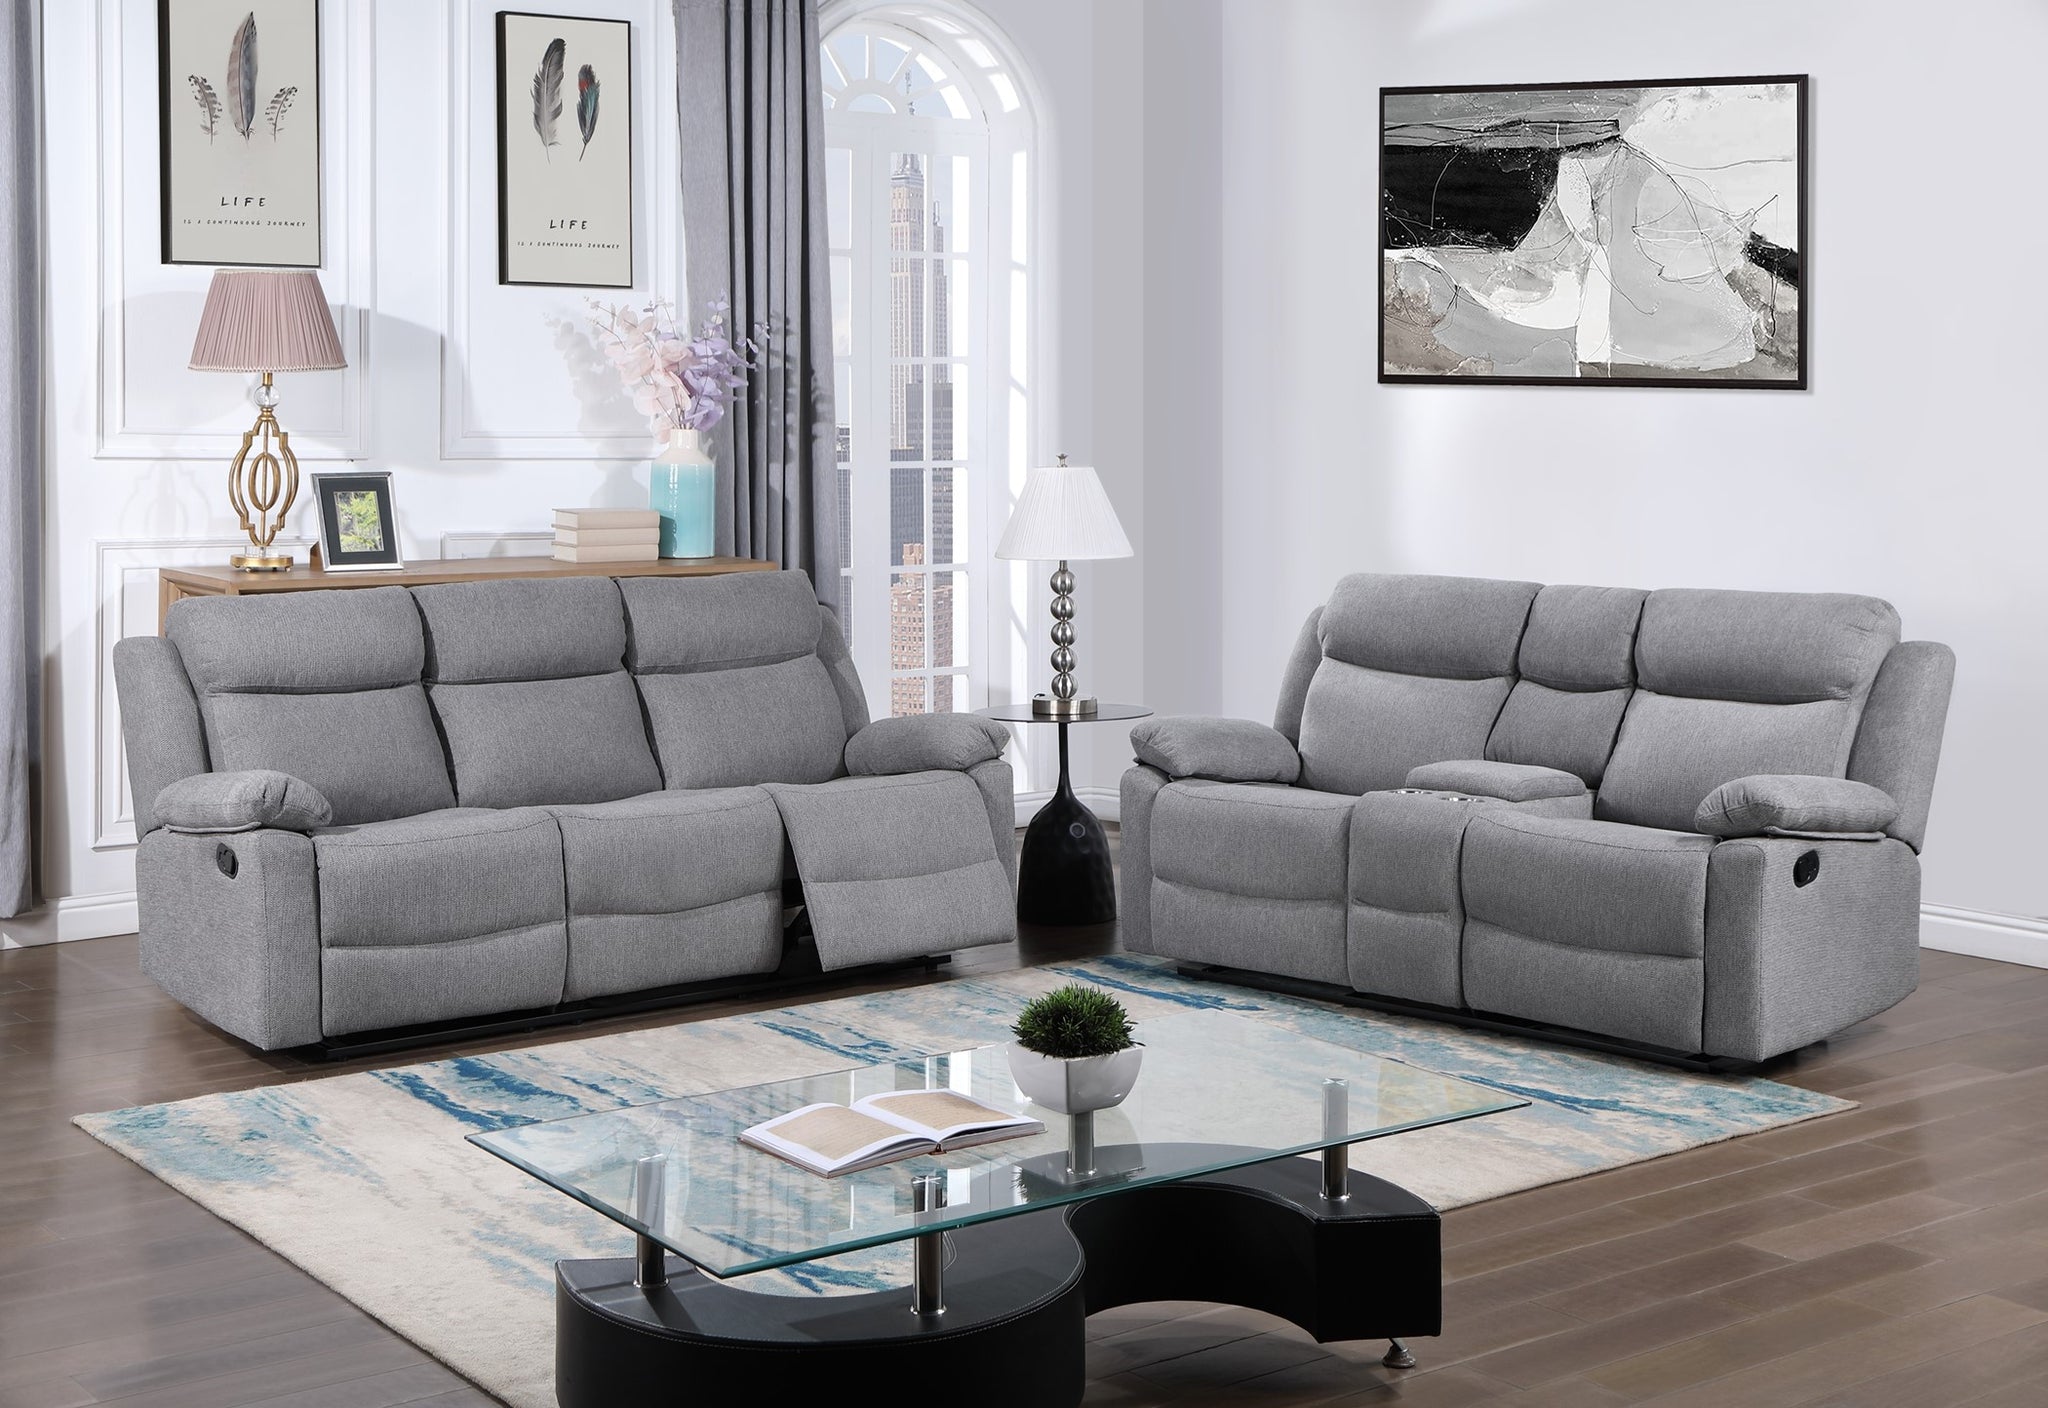 PROMISE / KELLY Sofa and Loveseat with storage